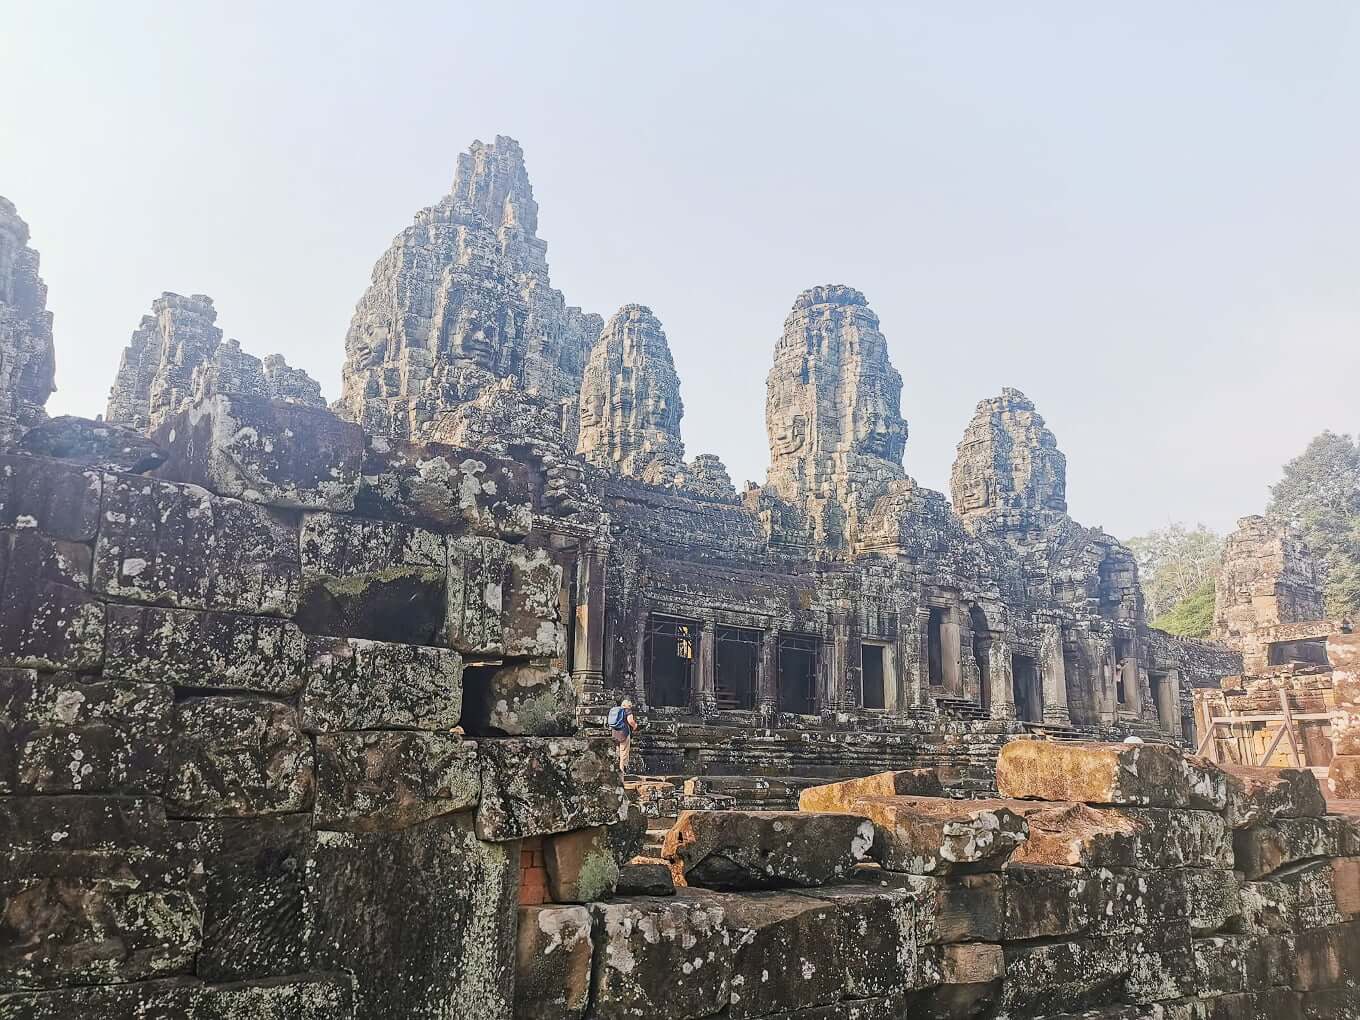 Authentic-Cambodia-Itinerary-11-days-Bayon-Siem-Reap.jpg